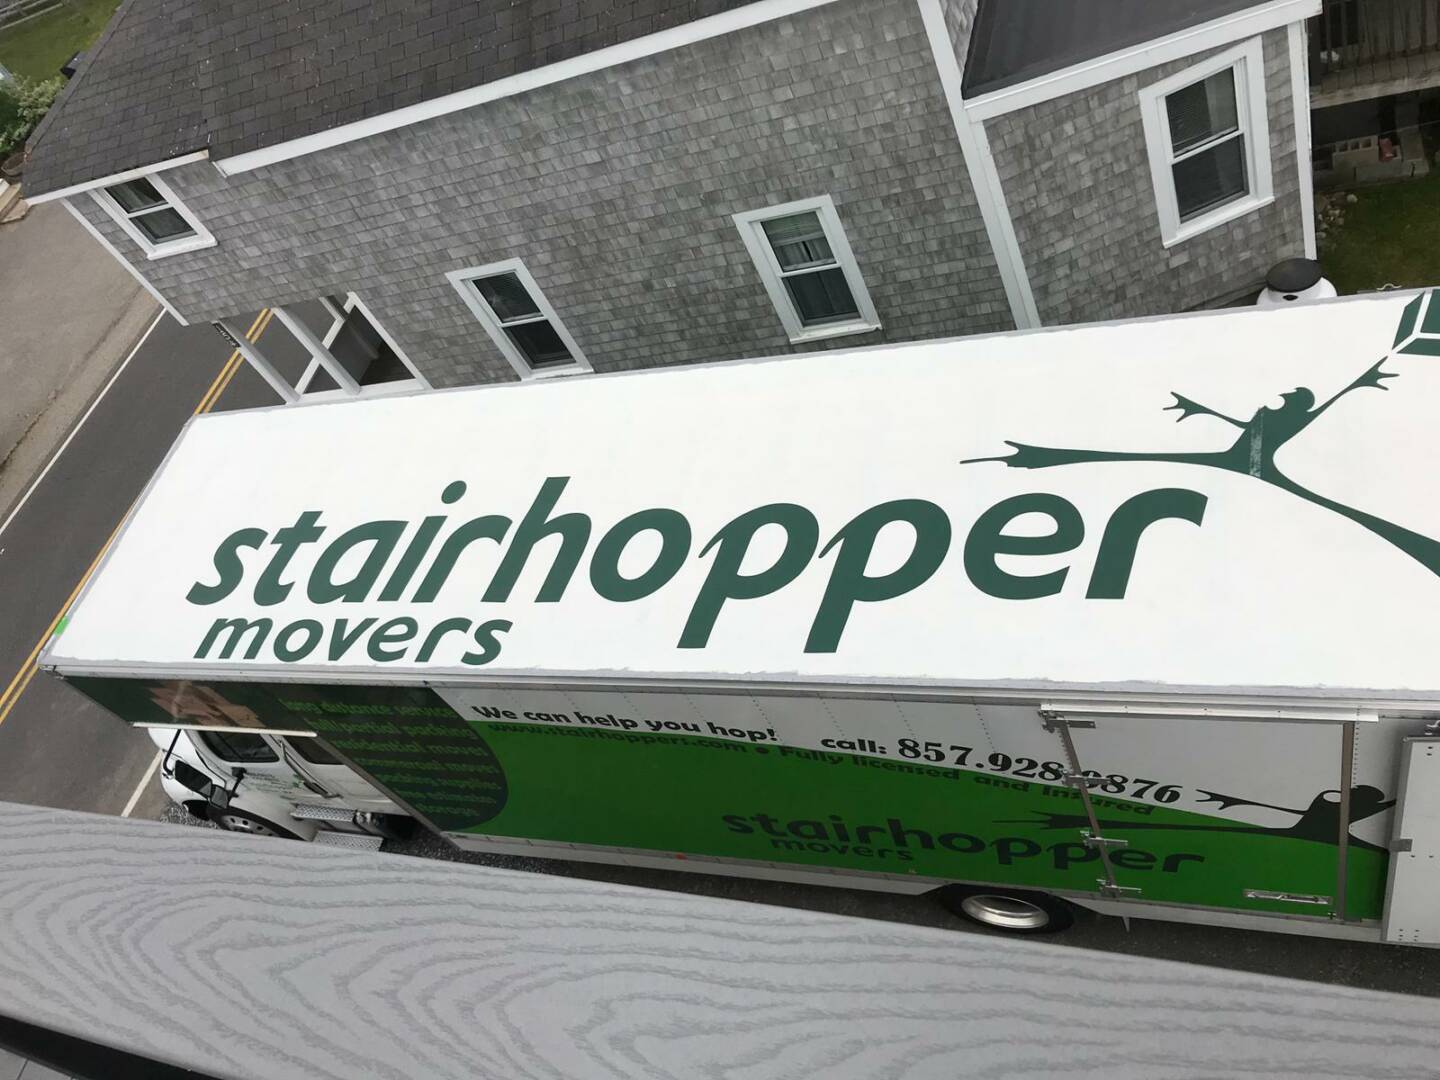 How Much Does it Cost to Hire Burlington Movers?